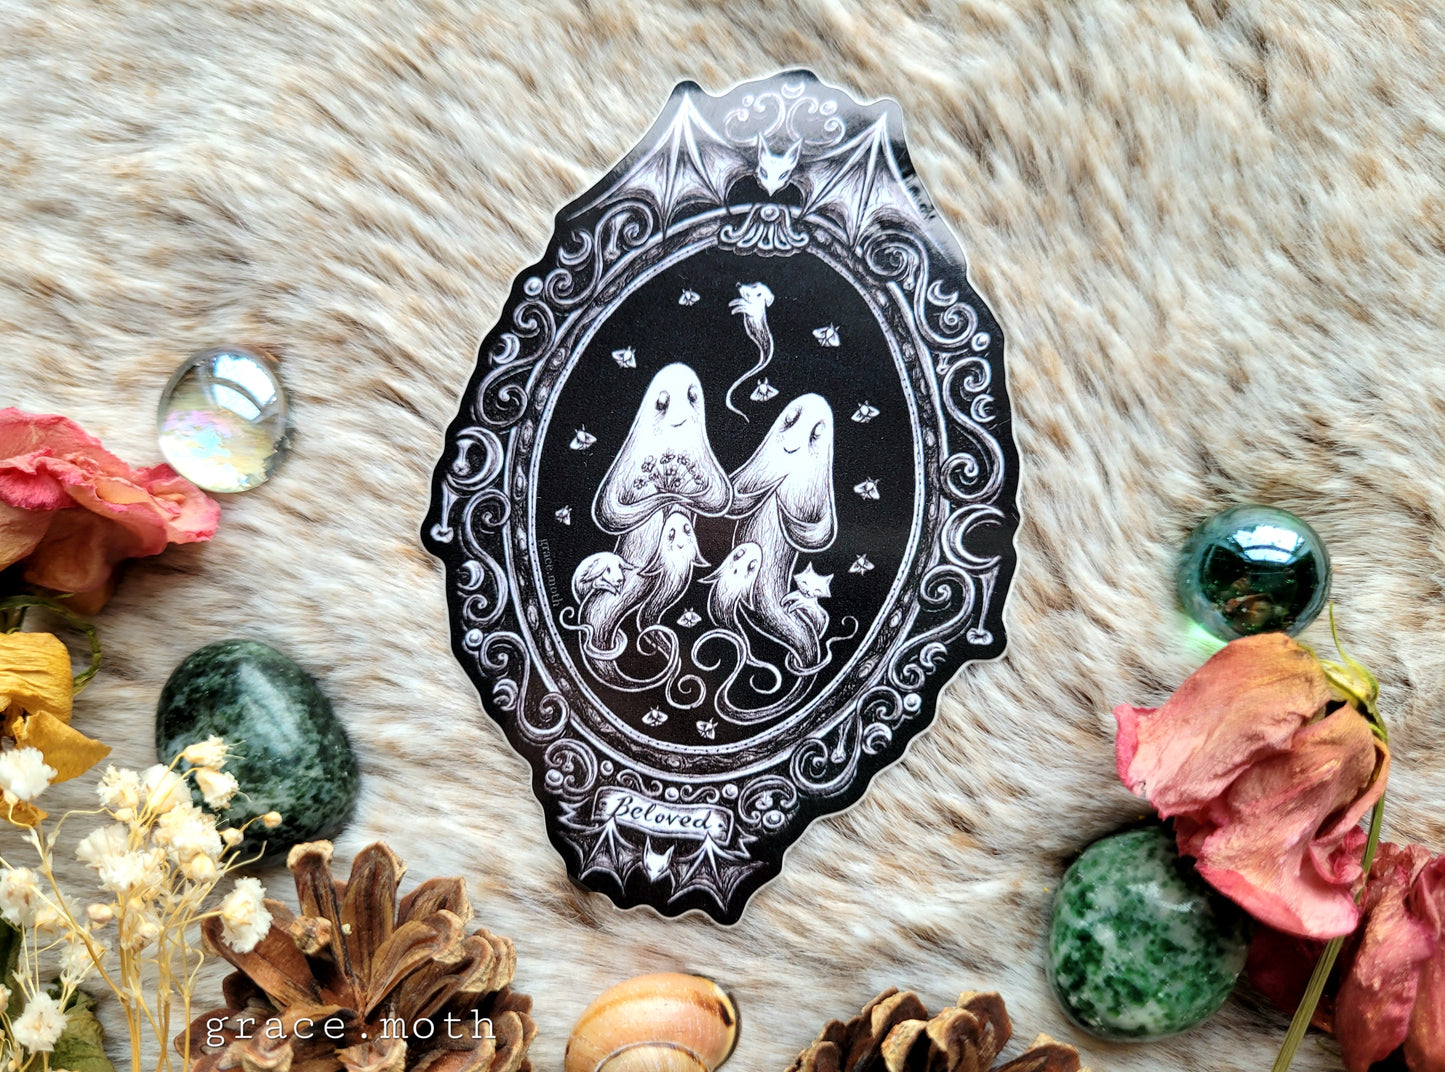 Ghost Family Portrait - Vinyl Sticker 10cm - Cottagecore - Witchy - Gothic - Illustrated by Grace moth